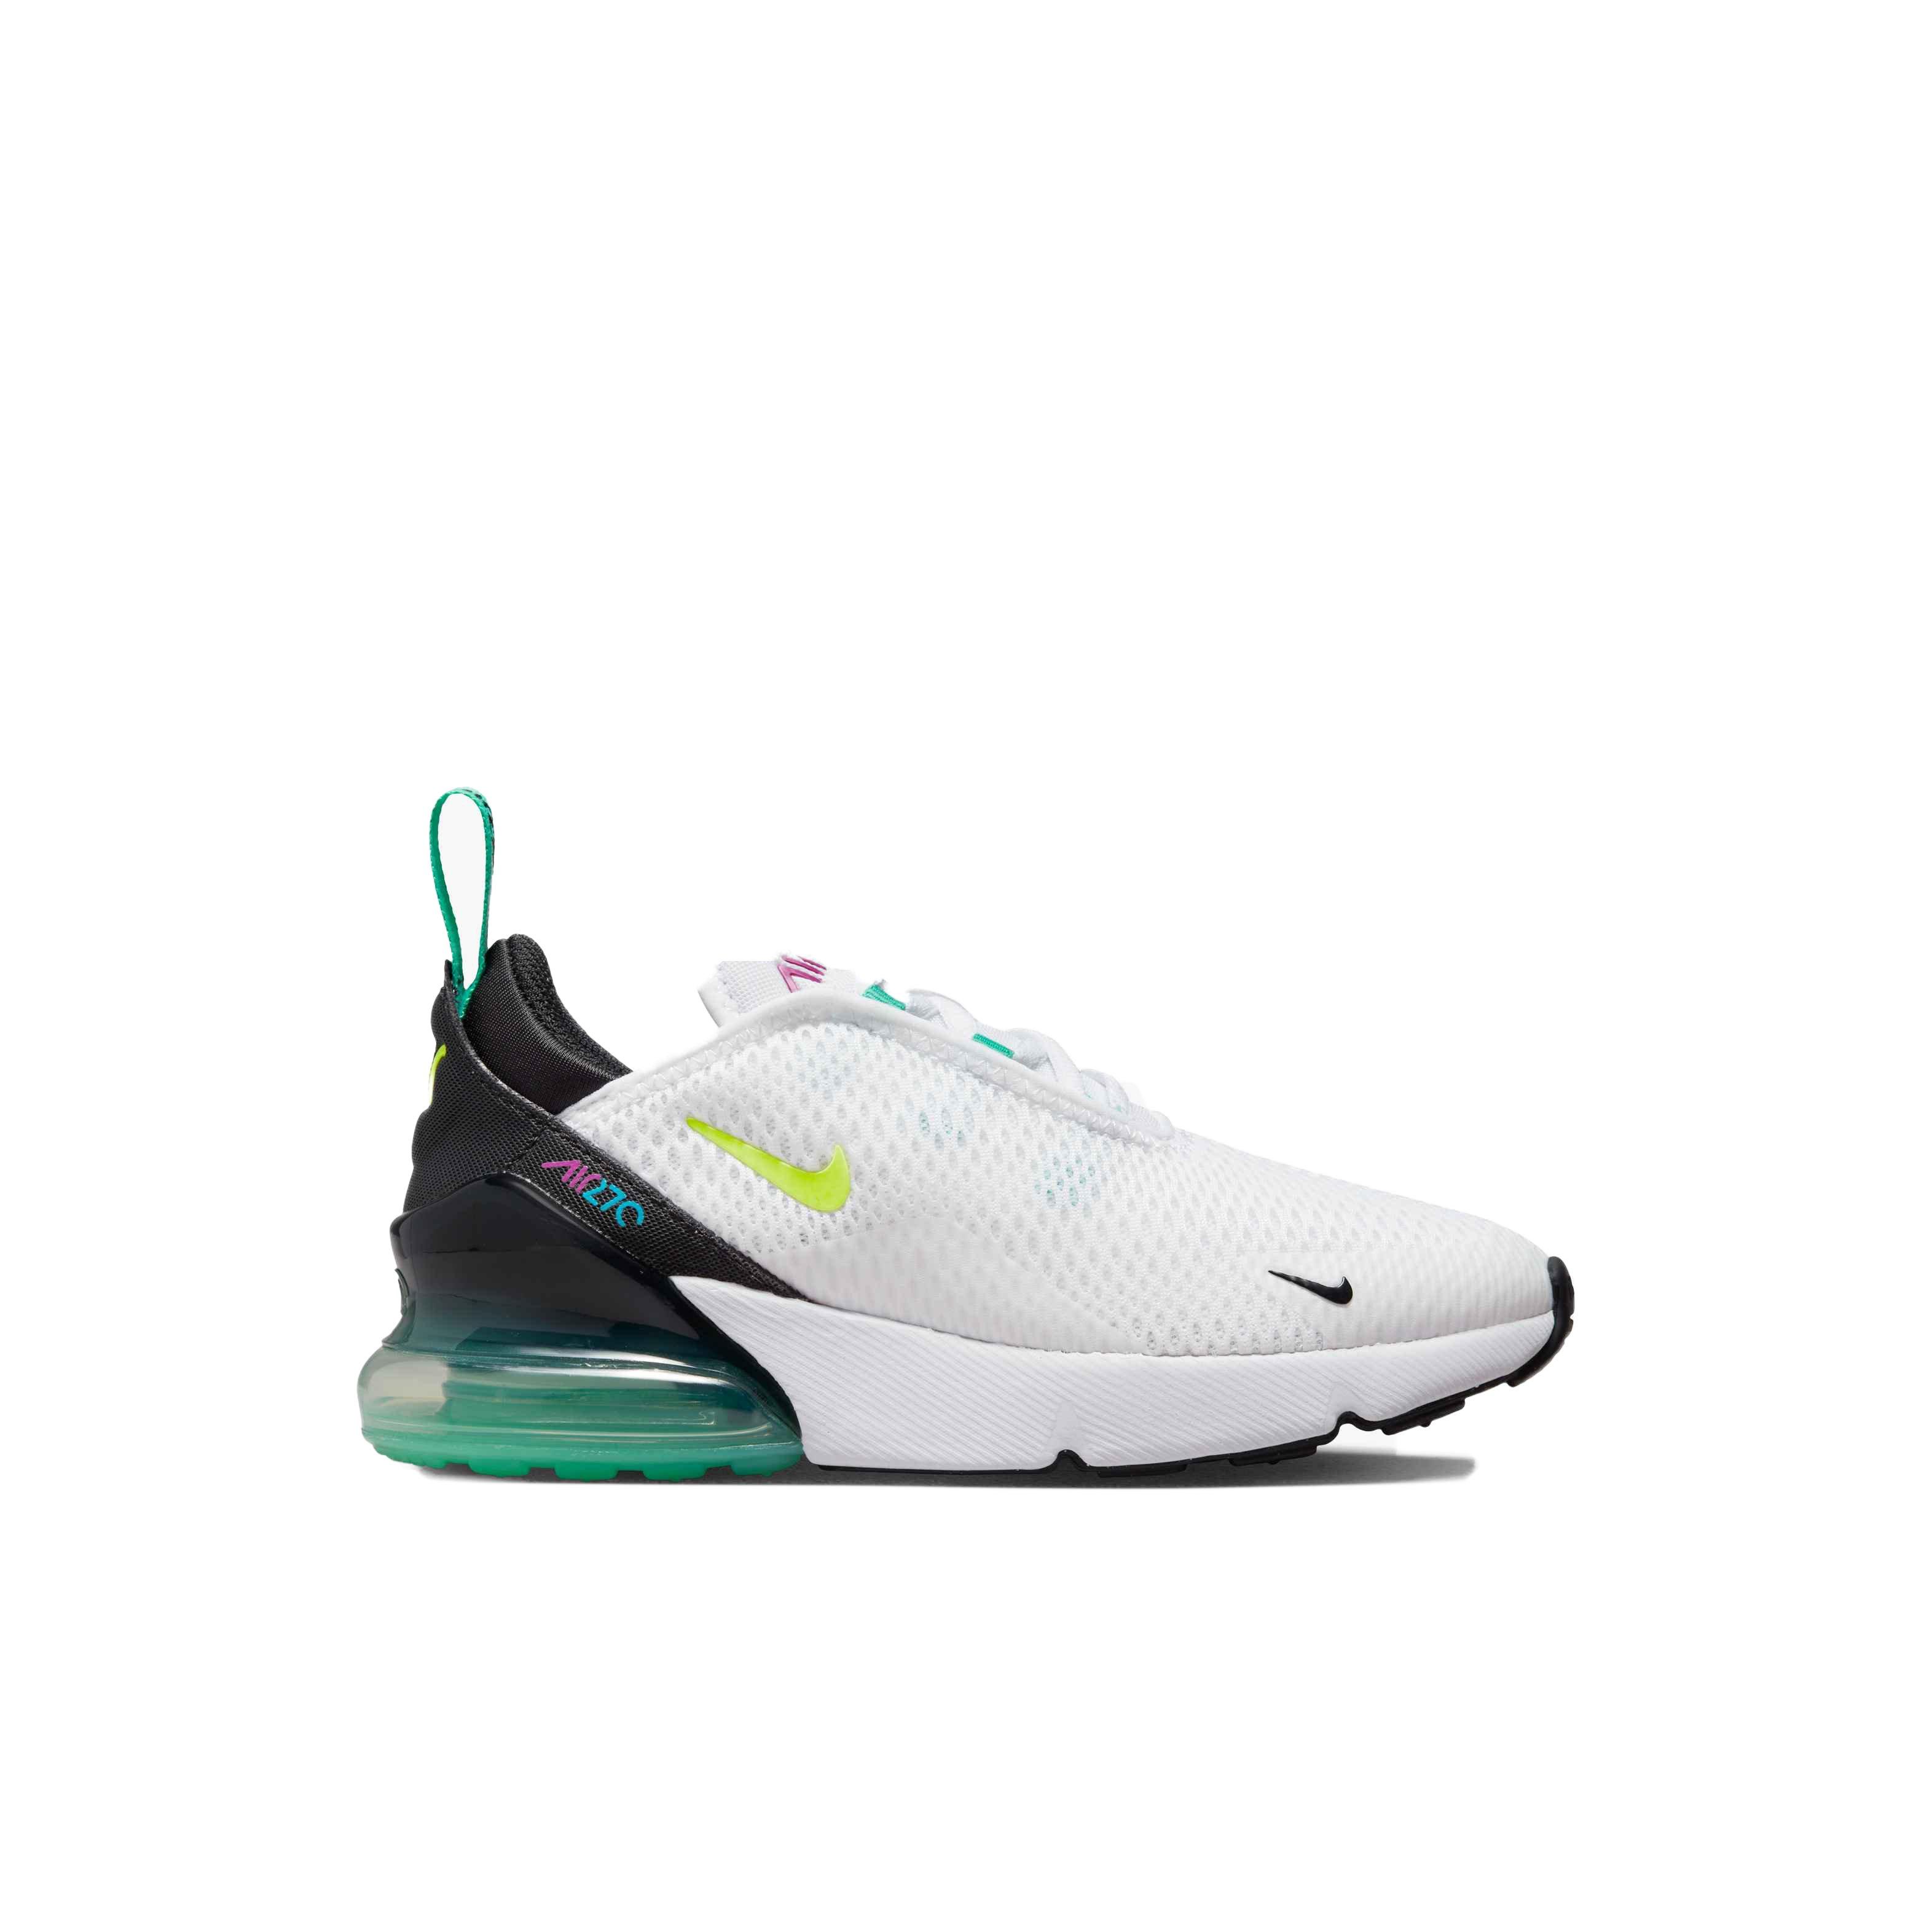 On Sale: Nike Air Max 270 React ENG Blue Volt — Sneaker Shouts